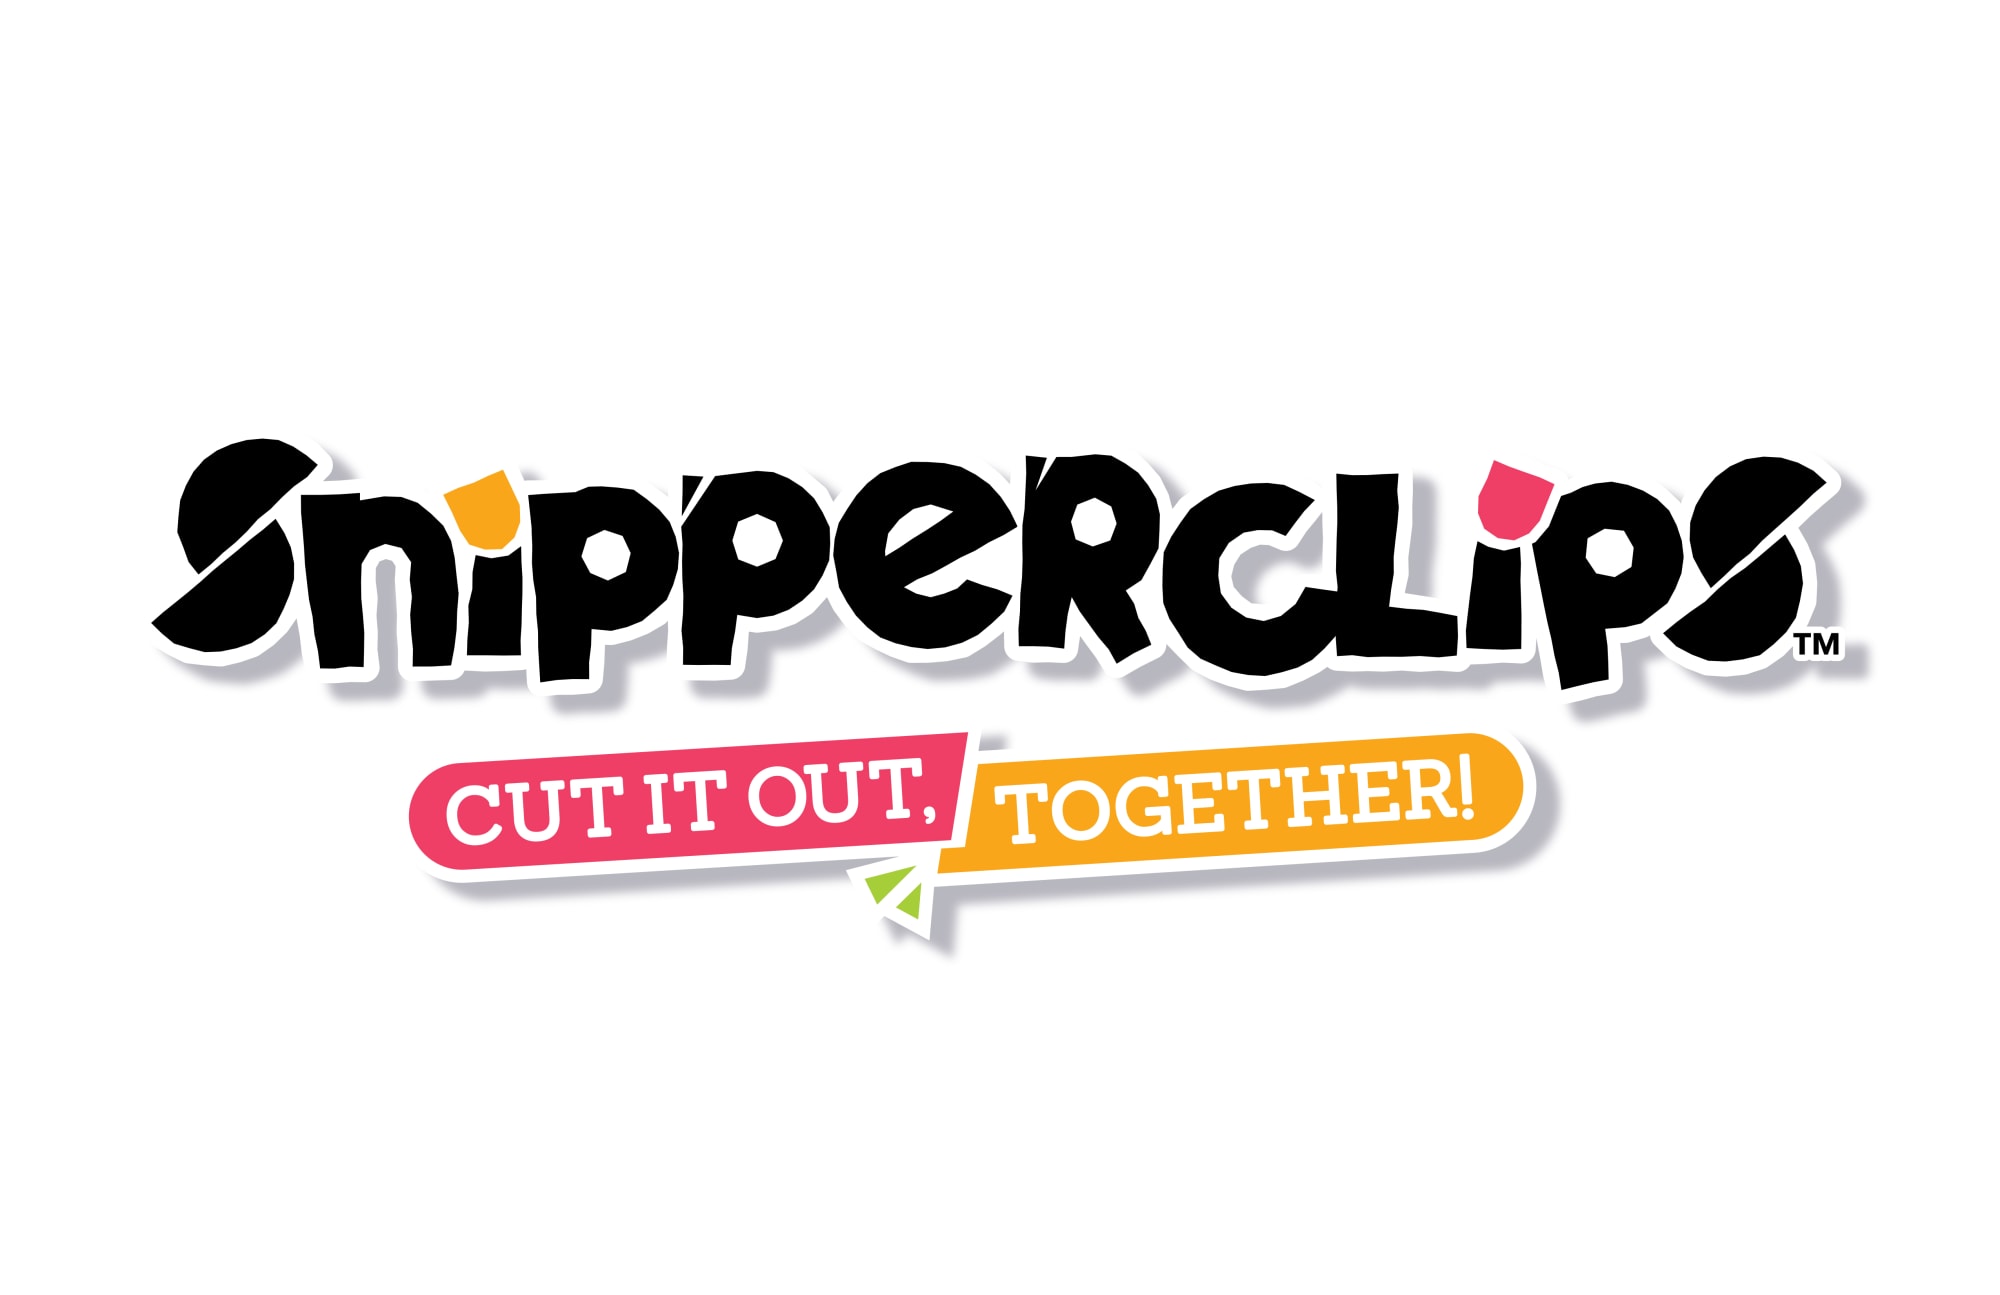 Snipperclips: Cut it out, together! - Nintendo Switch - wide 7